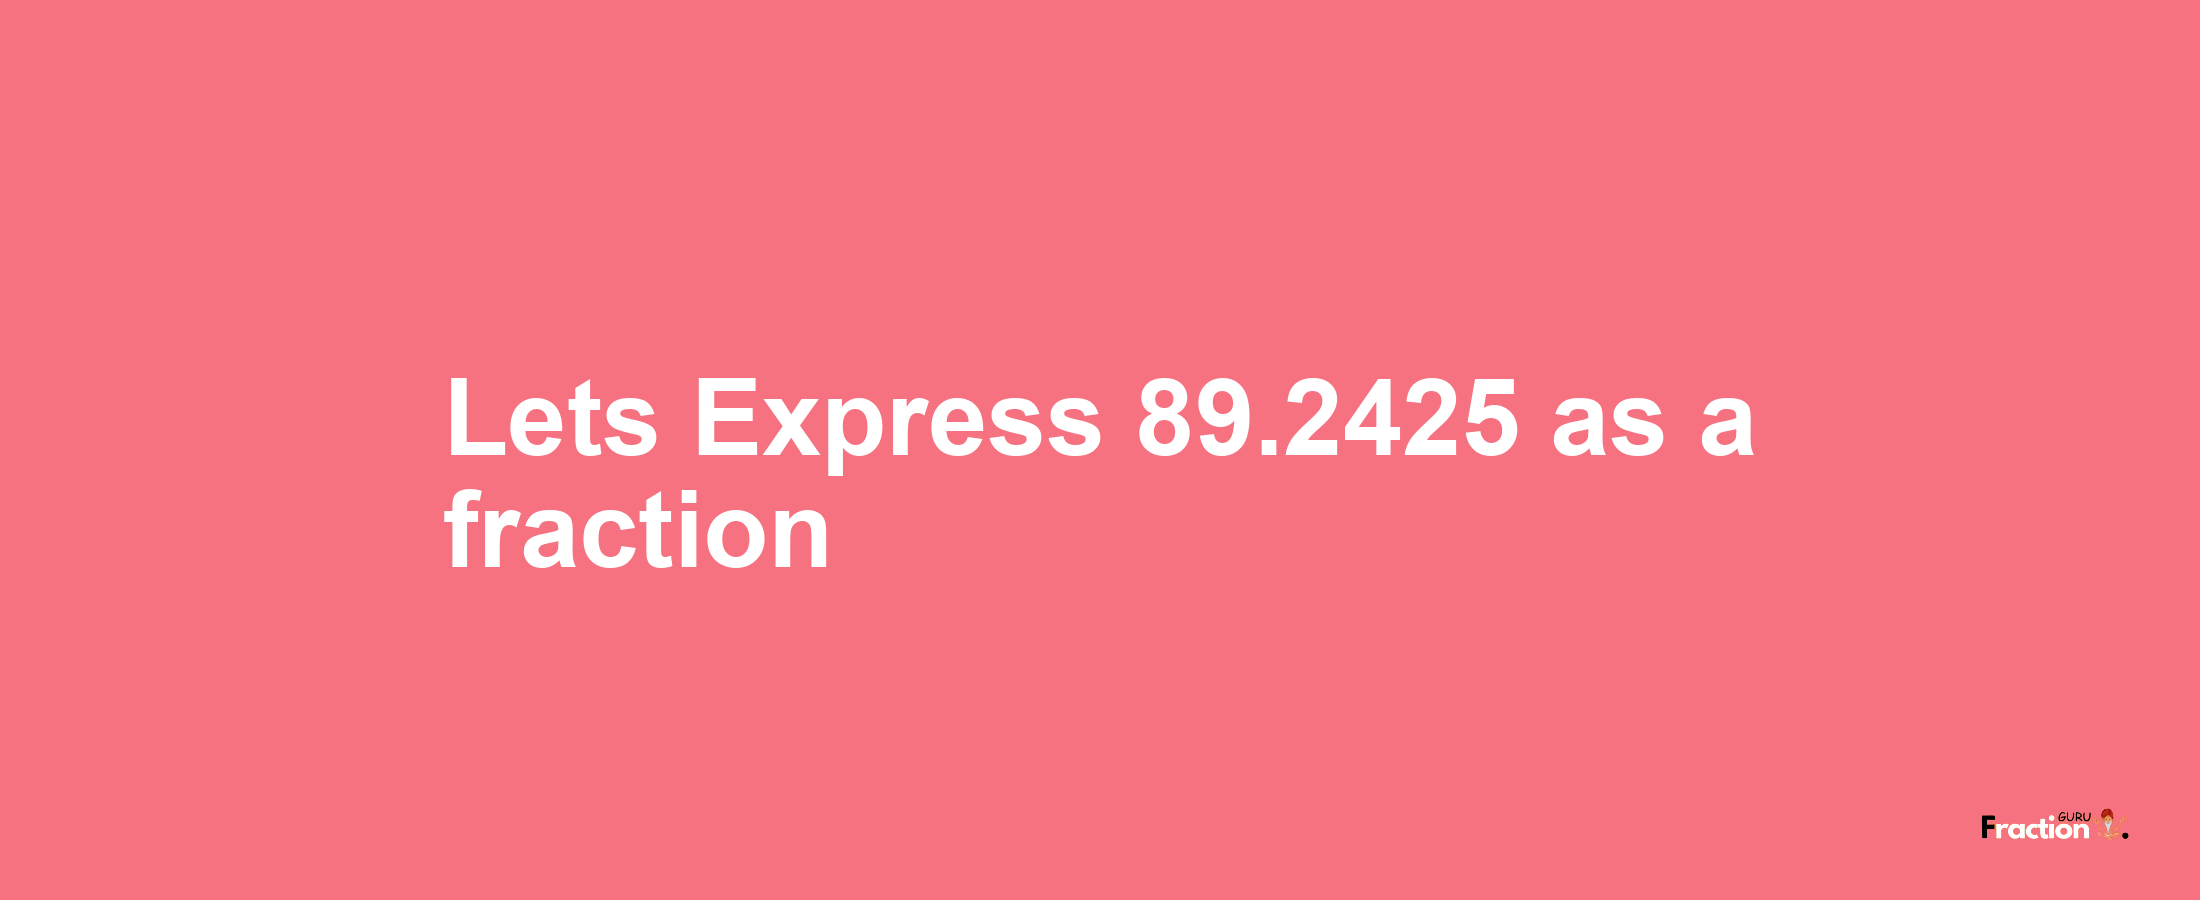 Lets Express 89.2425 as afraction